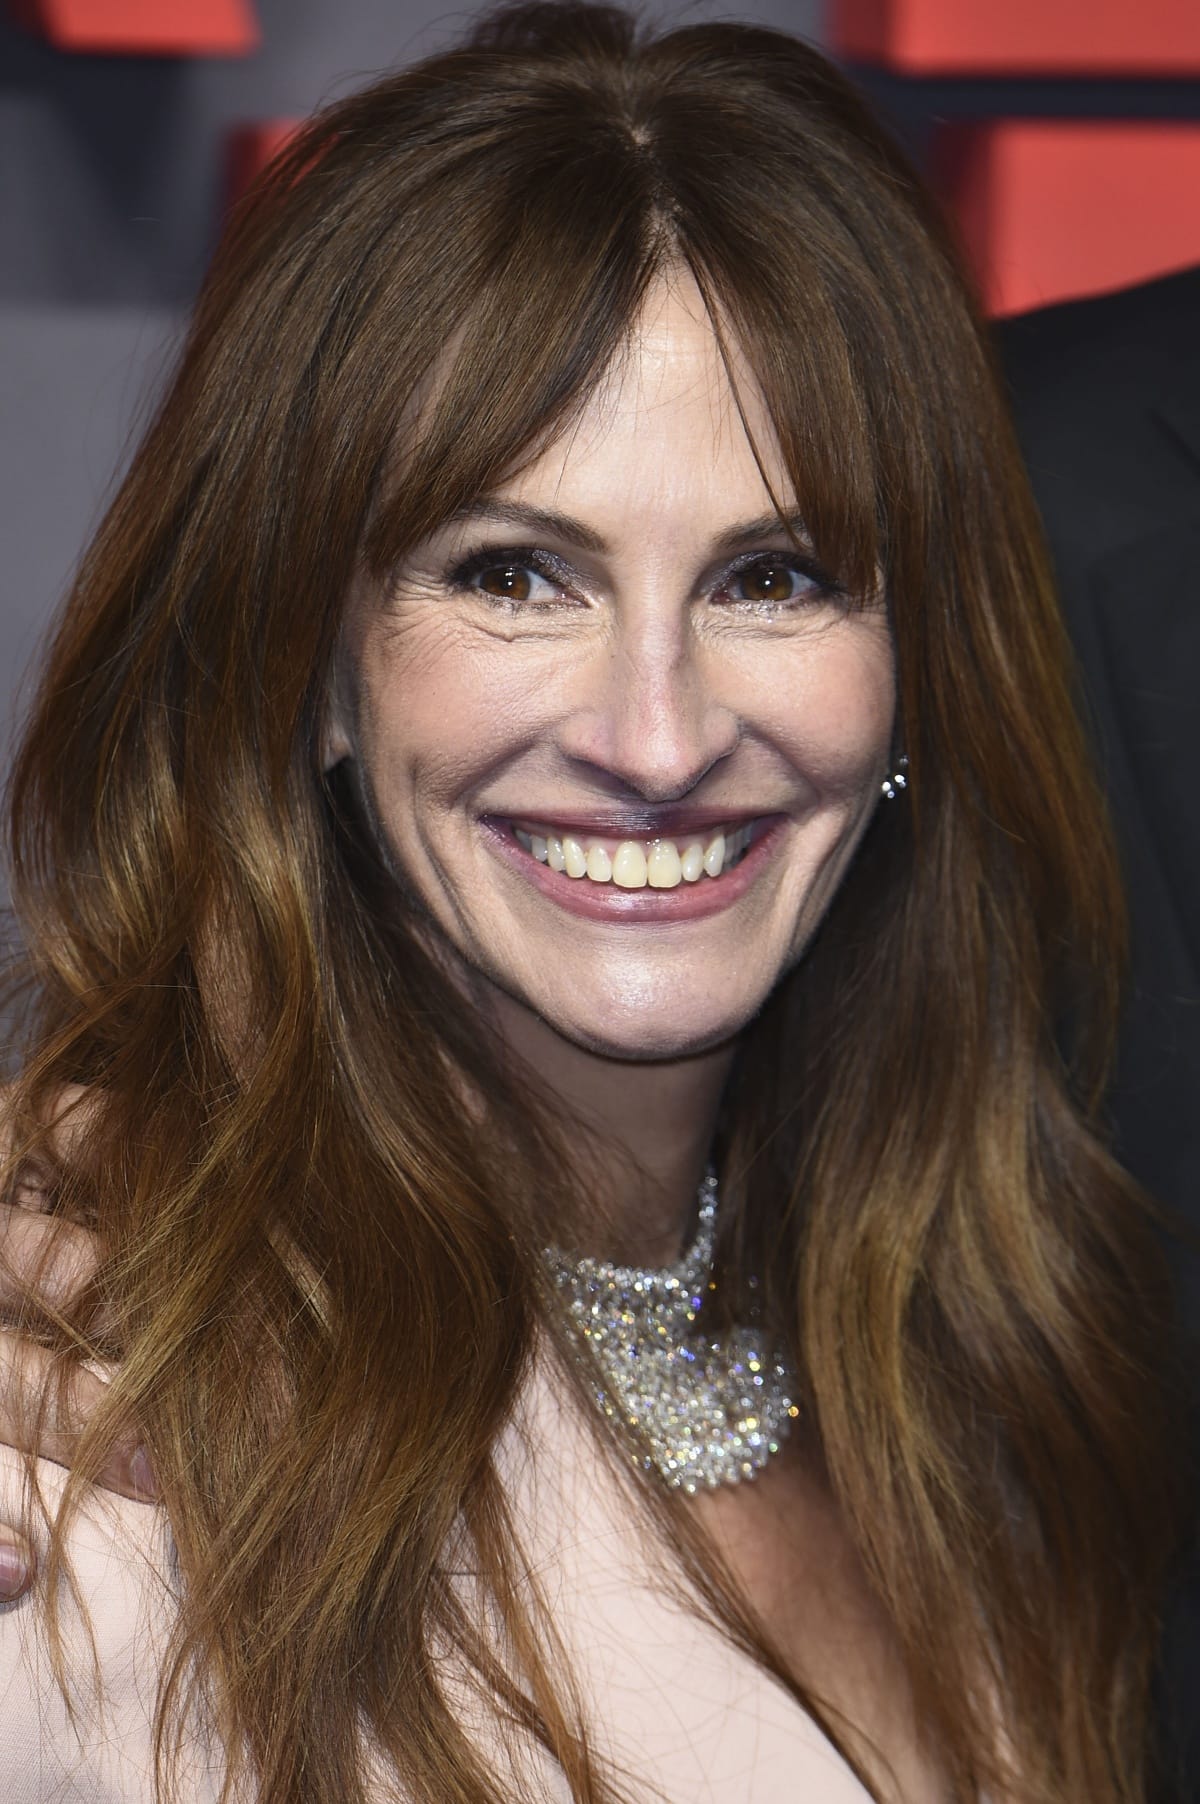 Julia Roberts’ beauty look consisted of a rose-colored lip, Chopard jewelry, and new red hair styled in soft waves with bangs